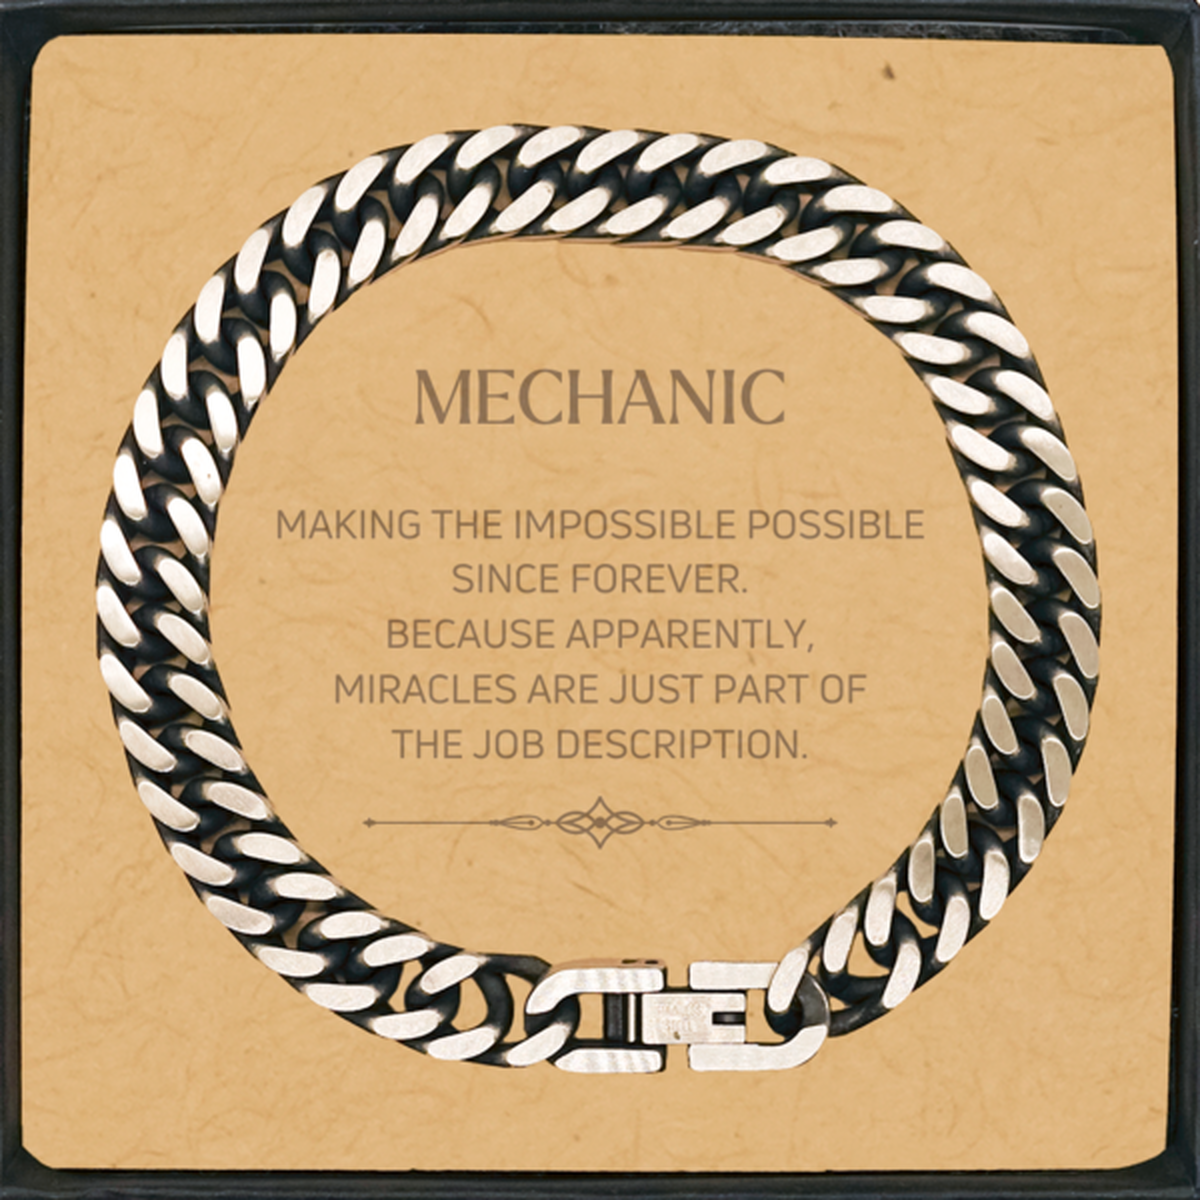 Funny Mechanic Gifts, Miracles are just part of the job description, Inspirational Birthday Cuban Link Chain Bracelet For Mechanic, Men, Women, Coworkers, Friends, Boss